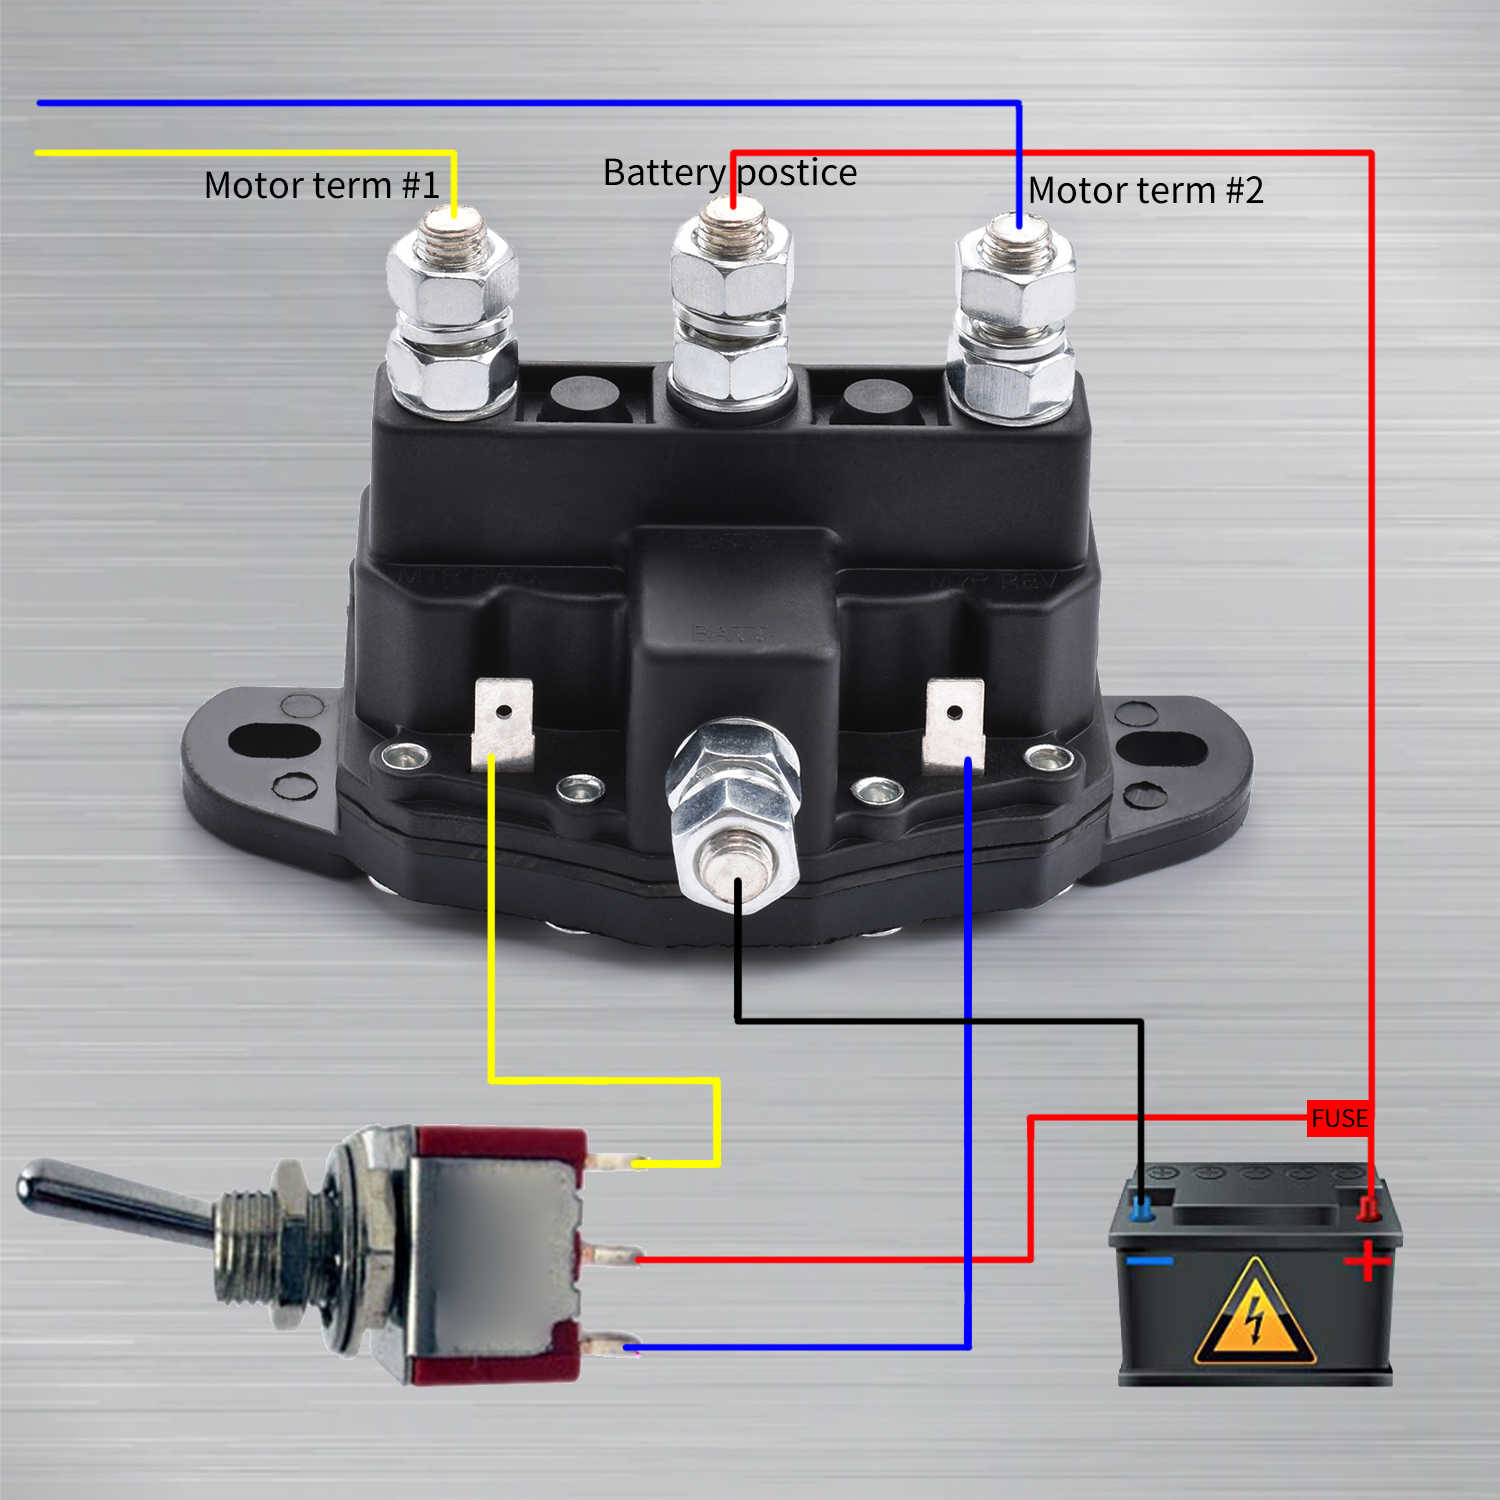 This solenoid is used to reverse polarity on Permanent Magnet winch motors with 2 terminal post